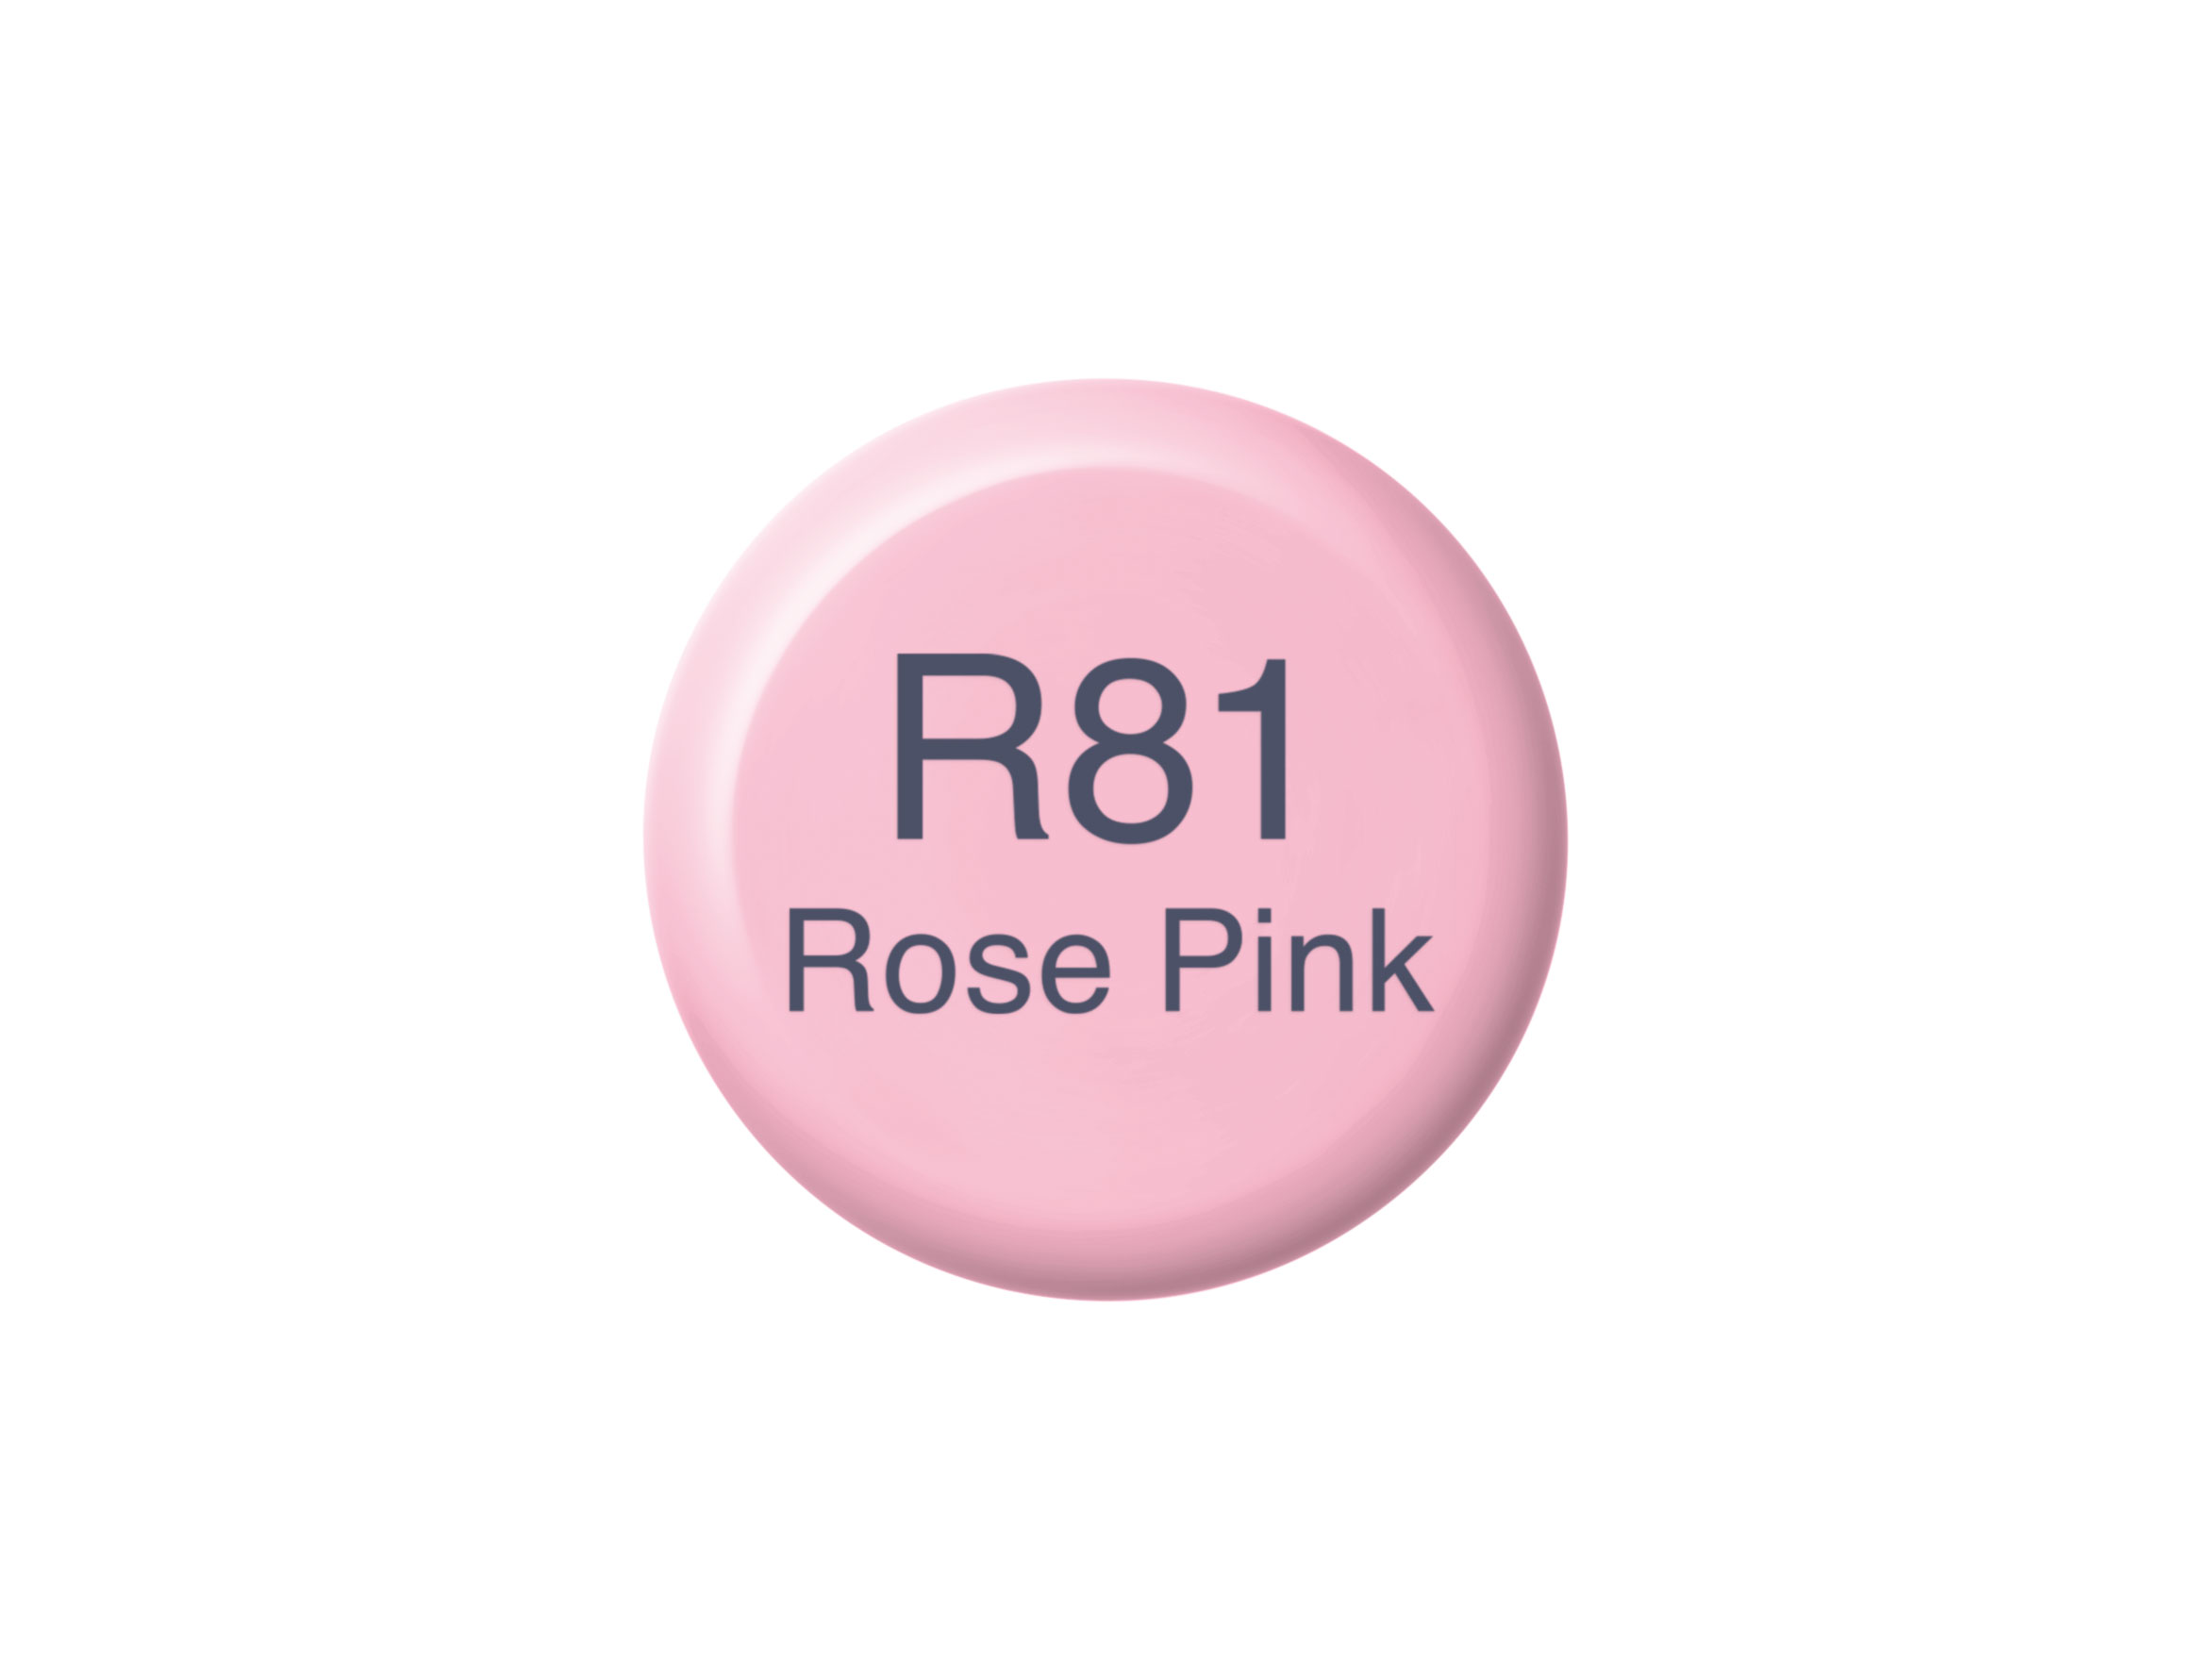 Copic Ink R81 Rose Pink